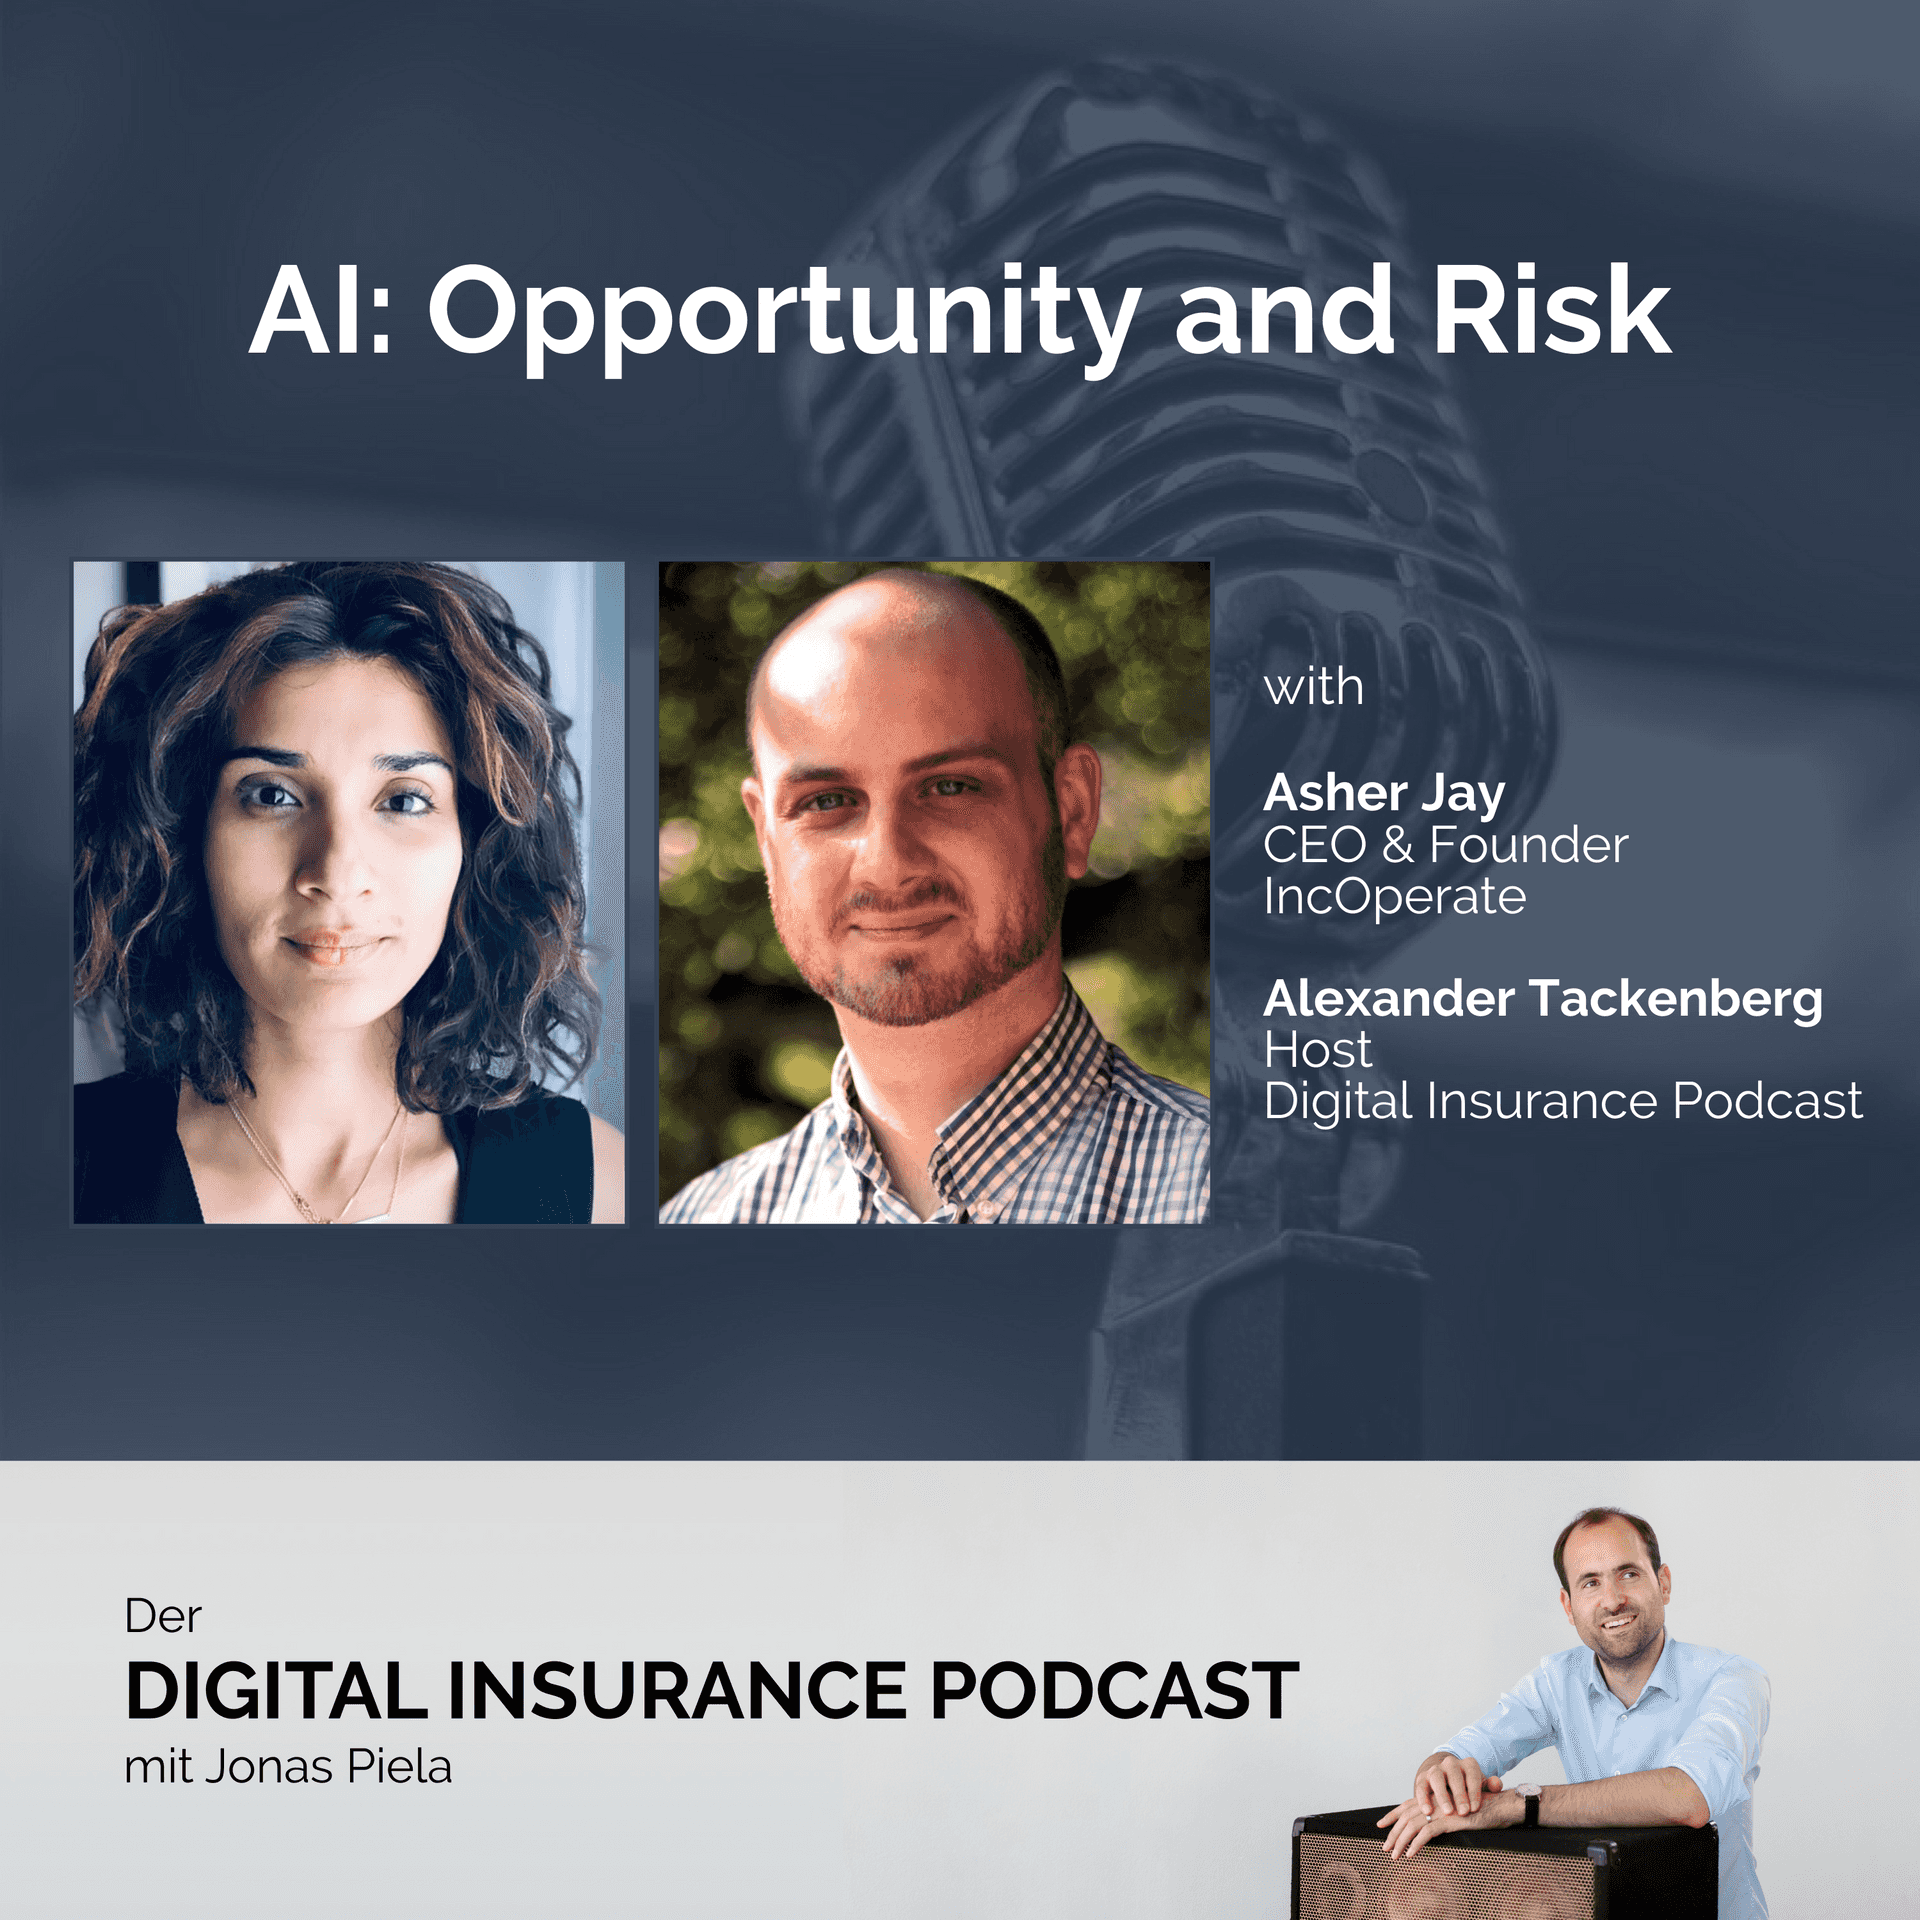 AI: Opportunity and Risk with Asher Jay